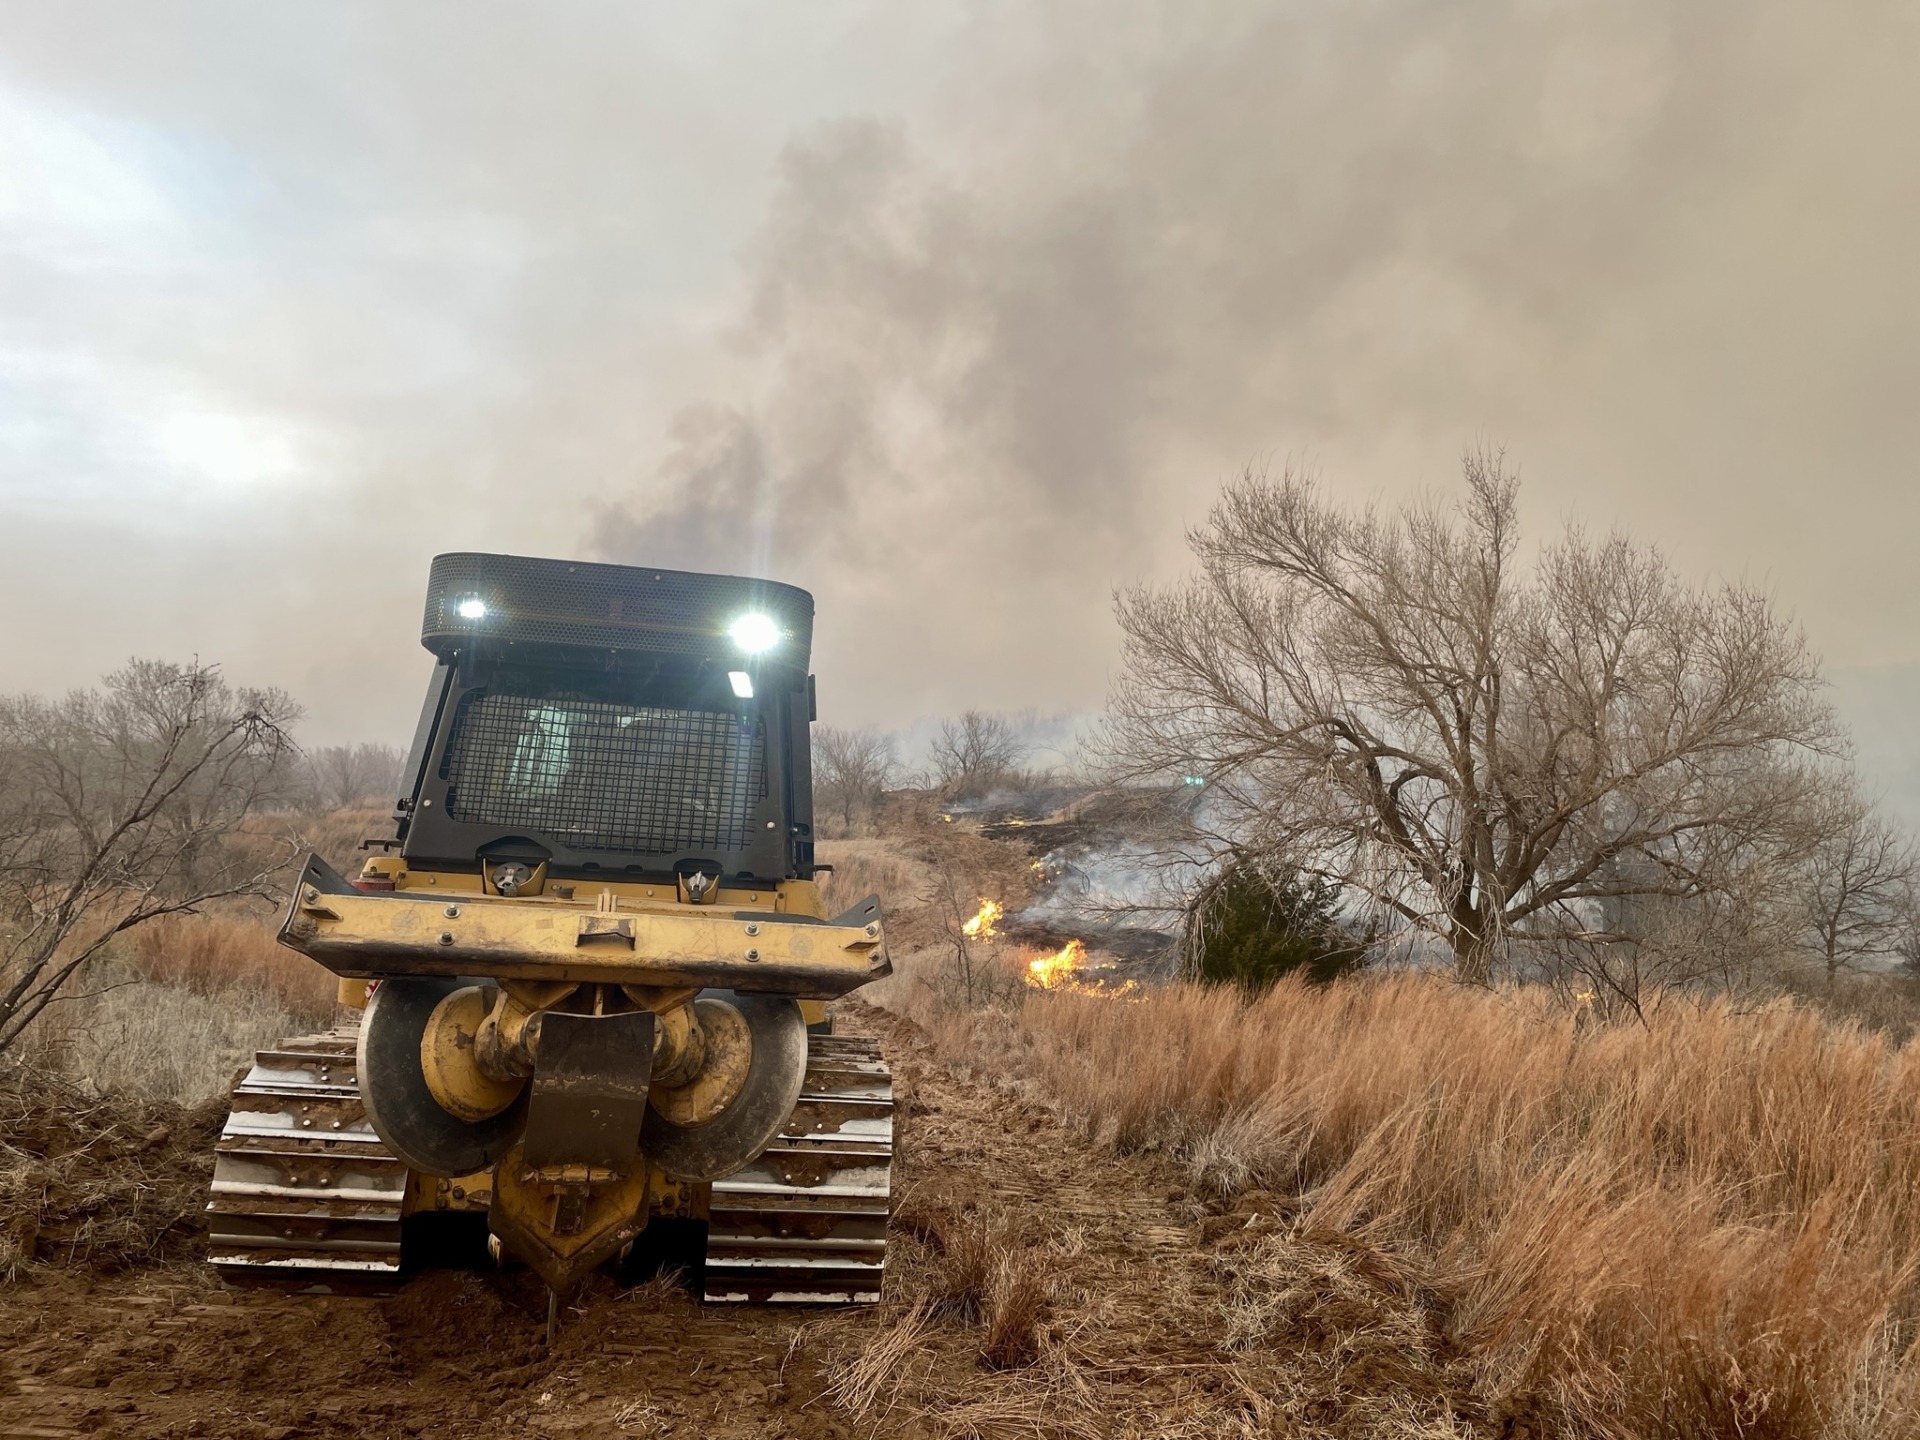 Pioneering wildfire alert system tested during Texas Panhandle fires